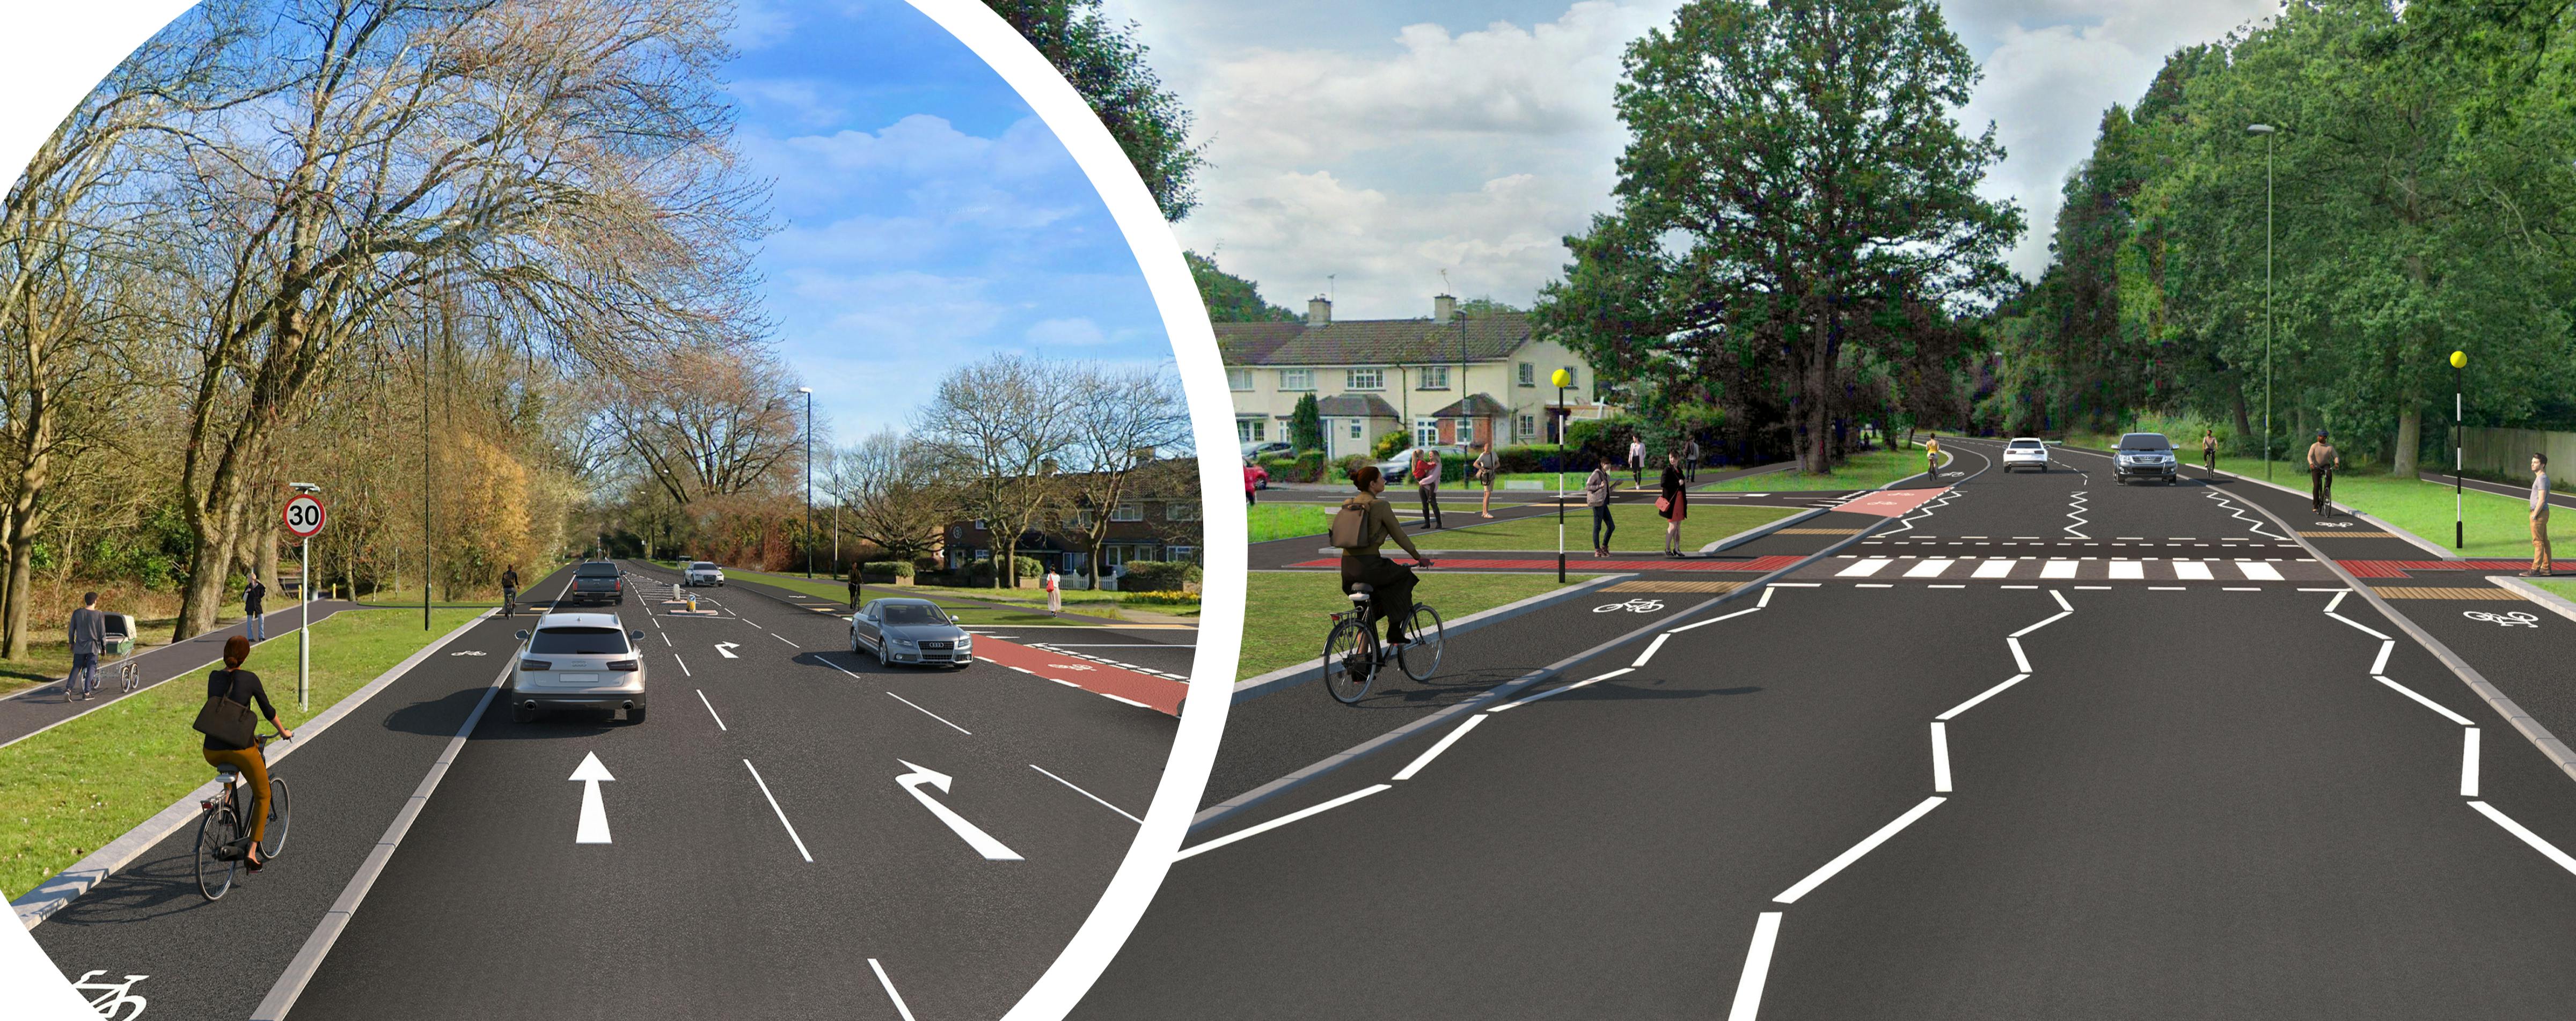 Artists impression of cycling and walking improvements along Northgate Avenue, Crawley.